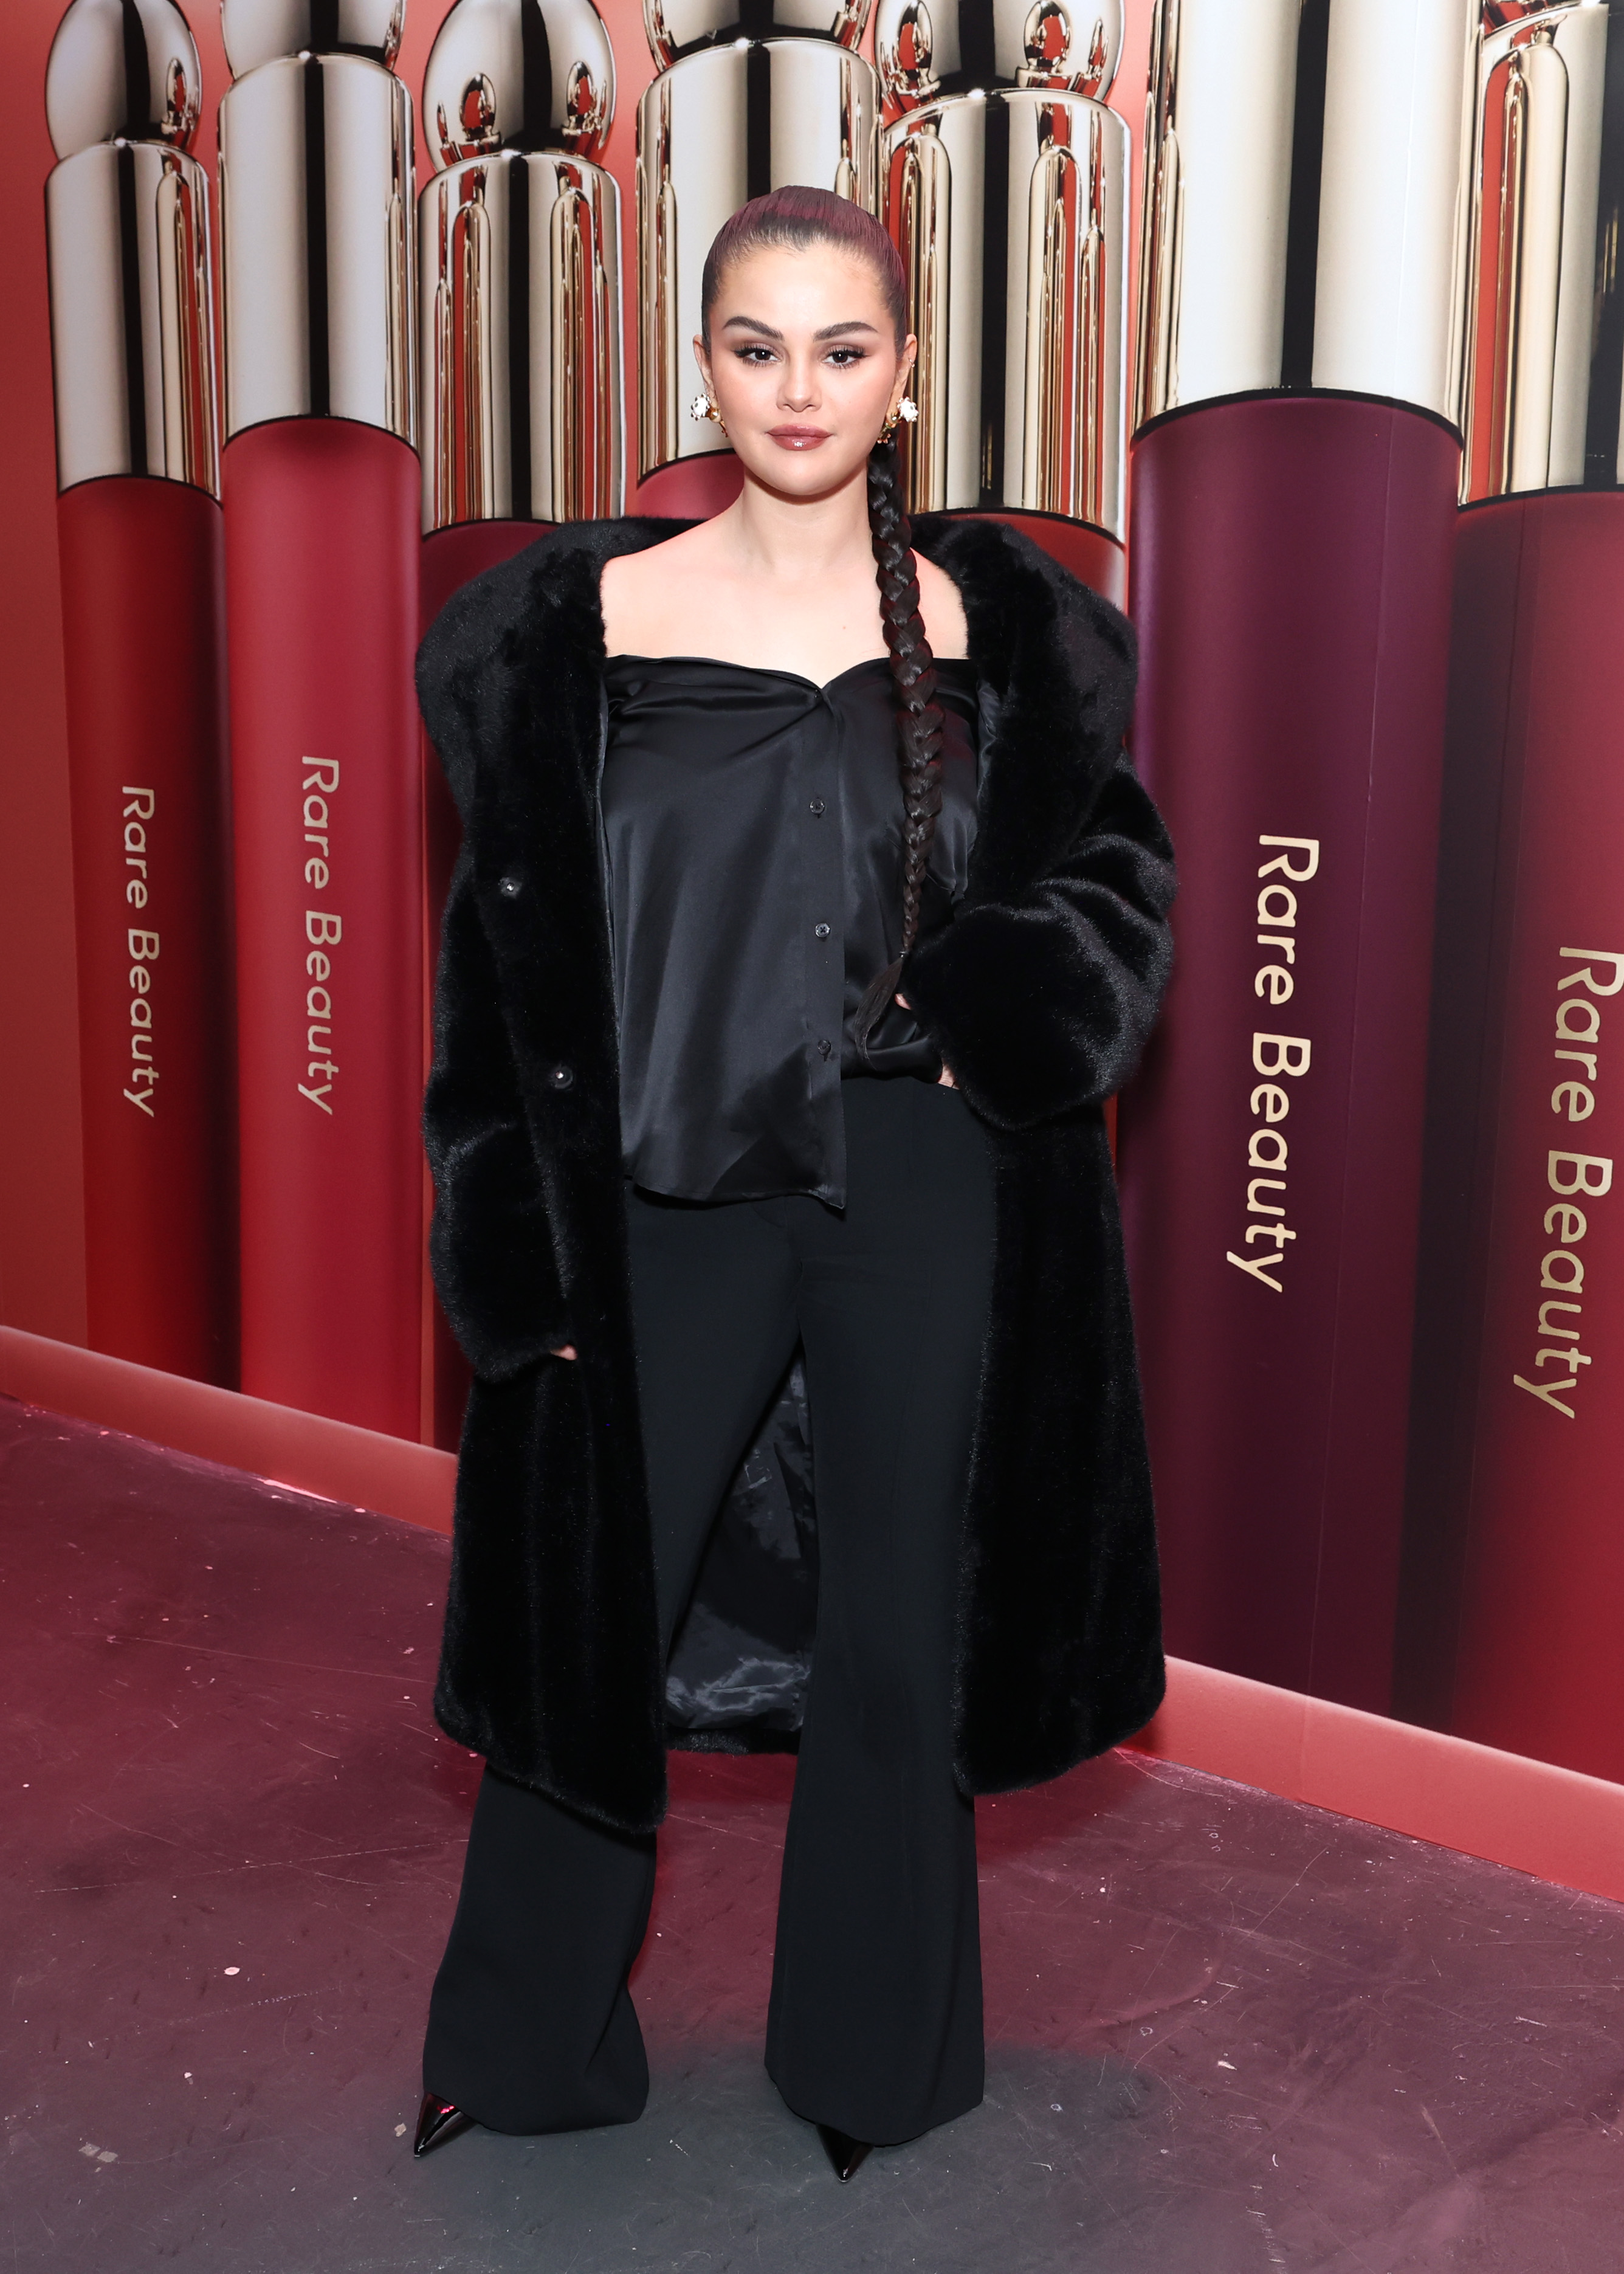 Selena Gomez celebrates the launch of Rare Beauty’s Soft Pinch Tinted Lip Oil Collection on March 29, 2023, in New York City